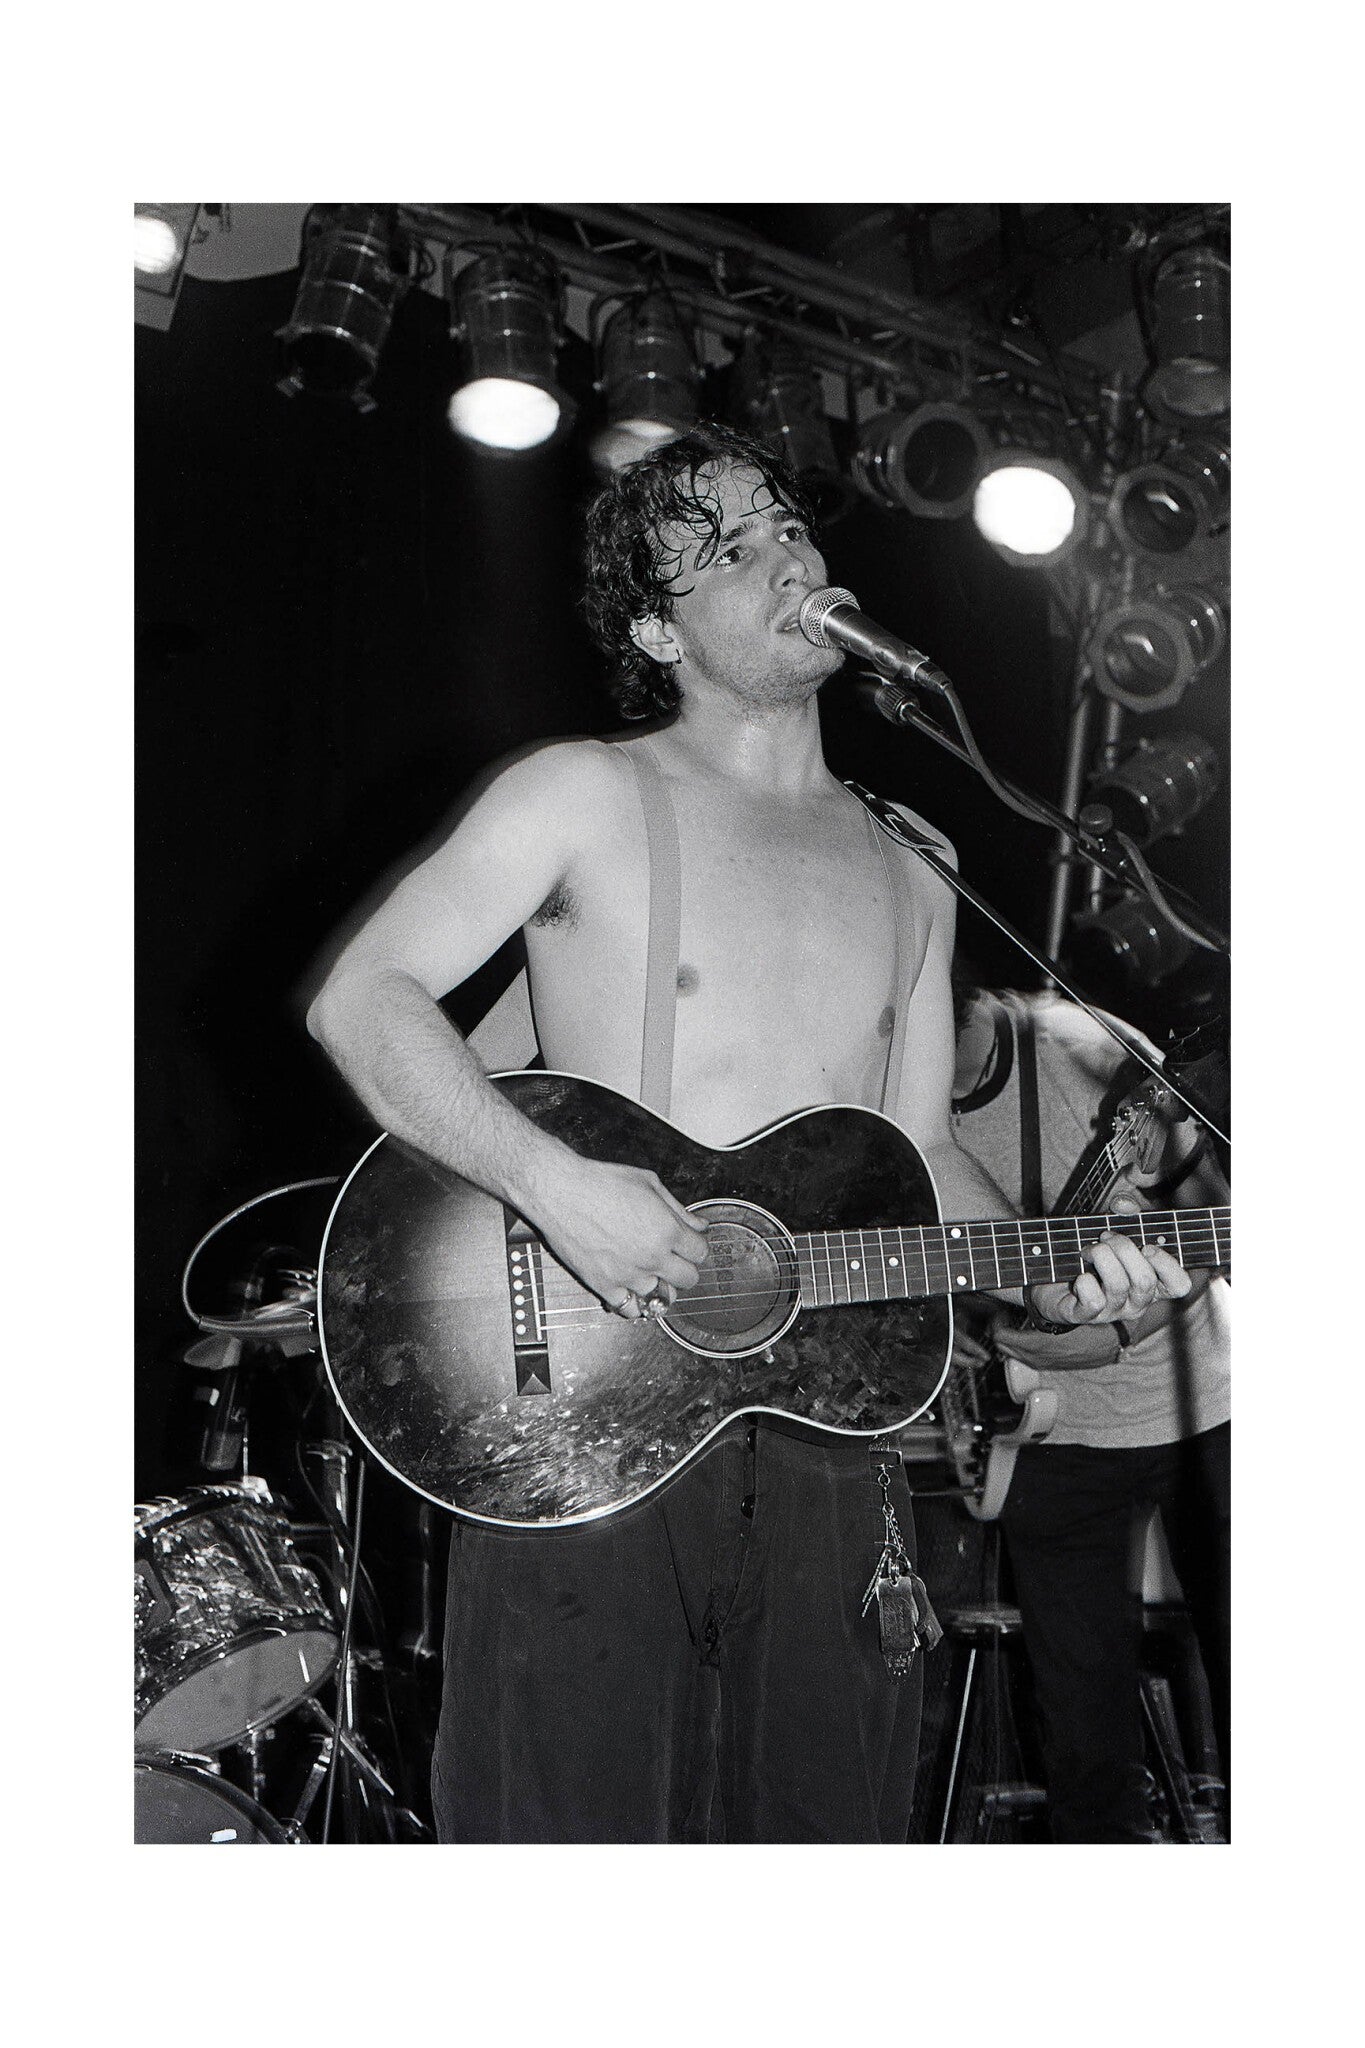 Jeff Buckley - Live at the London Garage, England, 1994 Print (2/2)